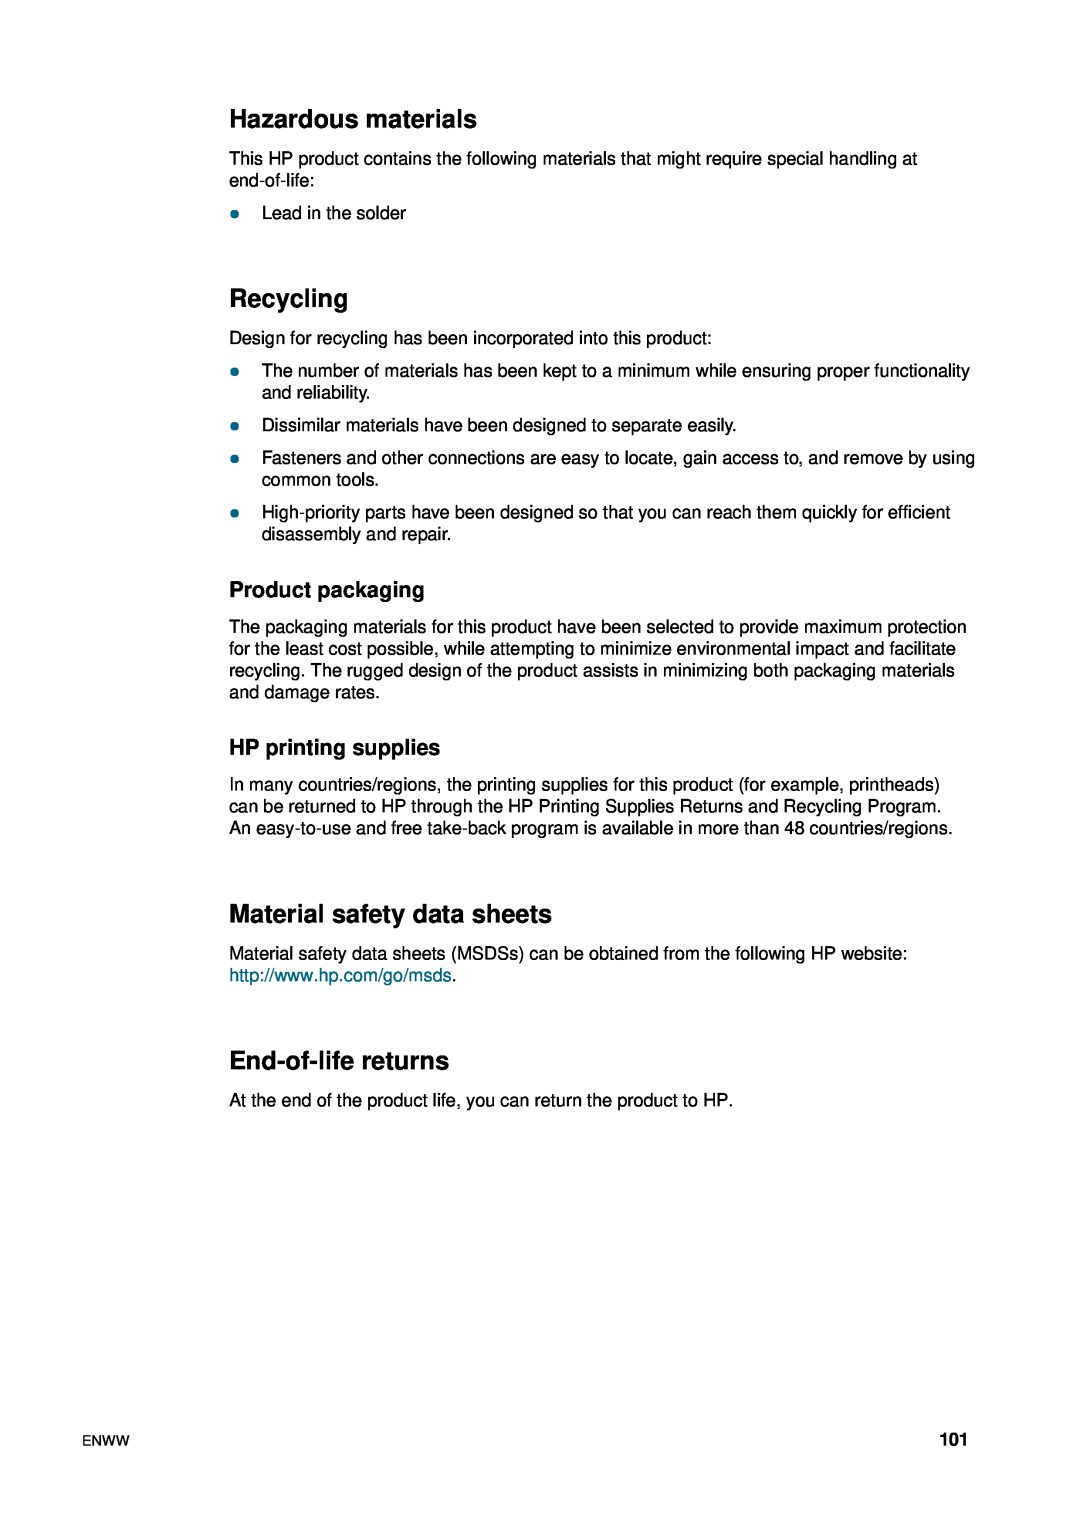 HP 1200 manual Hazardous materials, Recycling, Material safety data sheets, End-of-life returns, Product packaging 